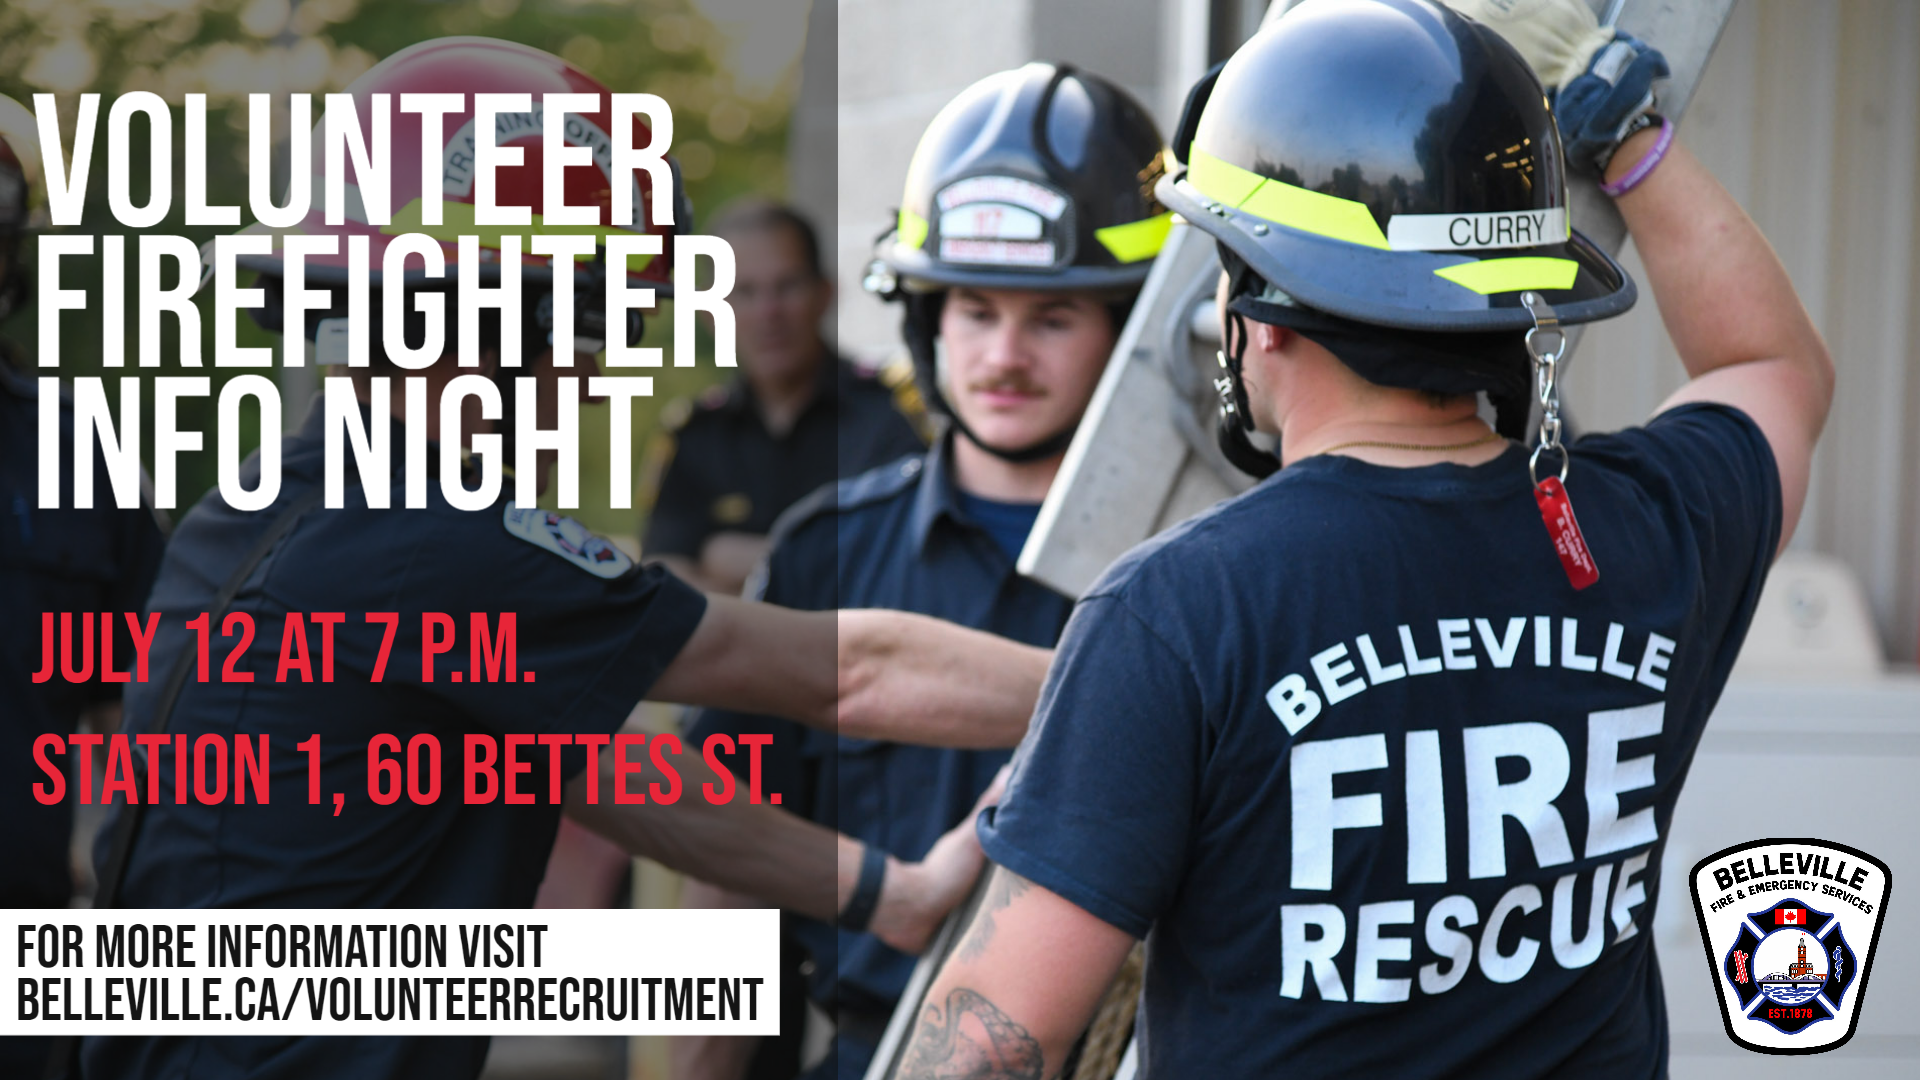 A poster for the Volunteer Firefighter Information Night on July 12 at 7 p.m. at Station 1. (60 Bettes St.)